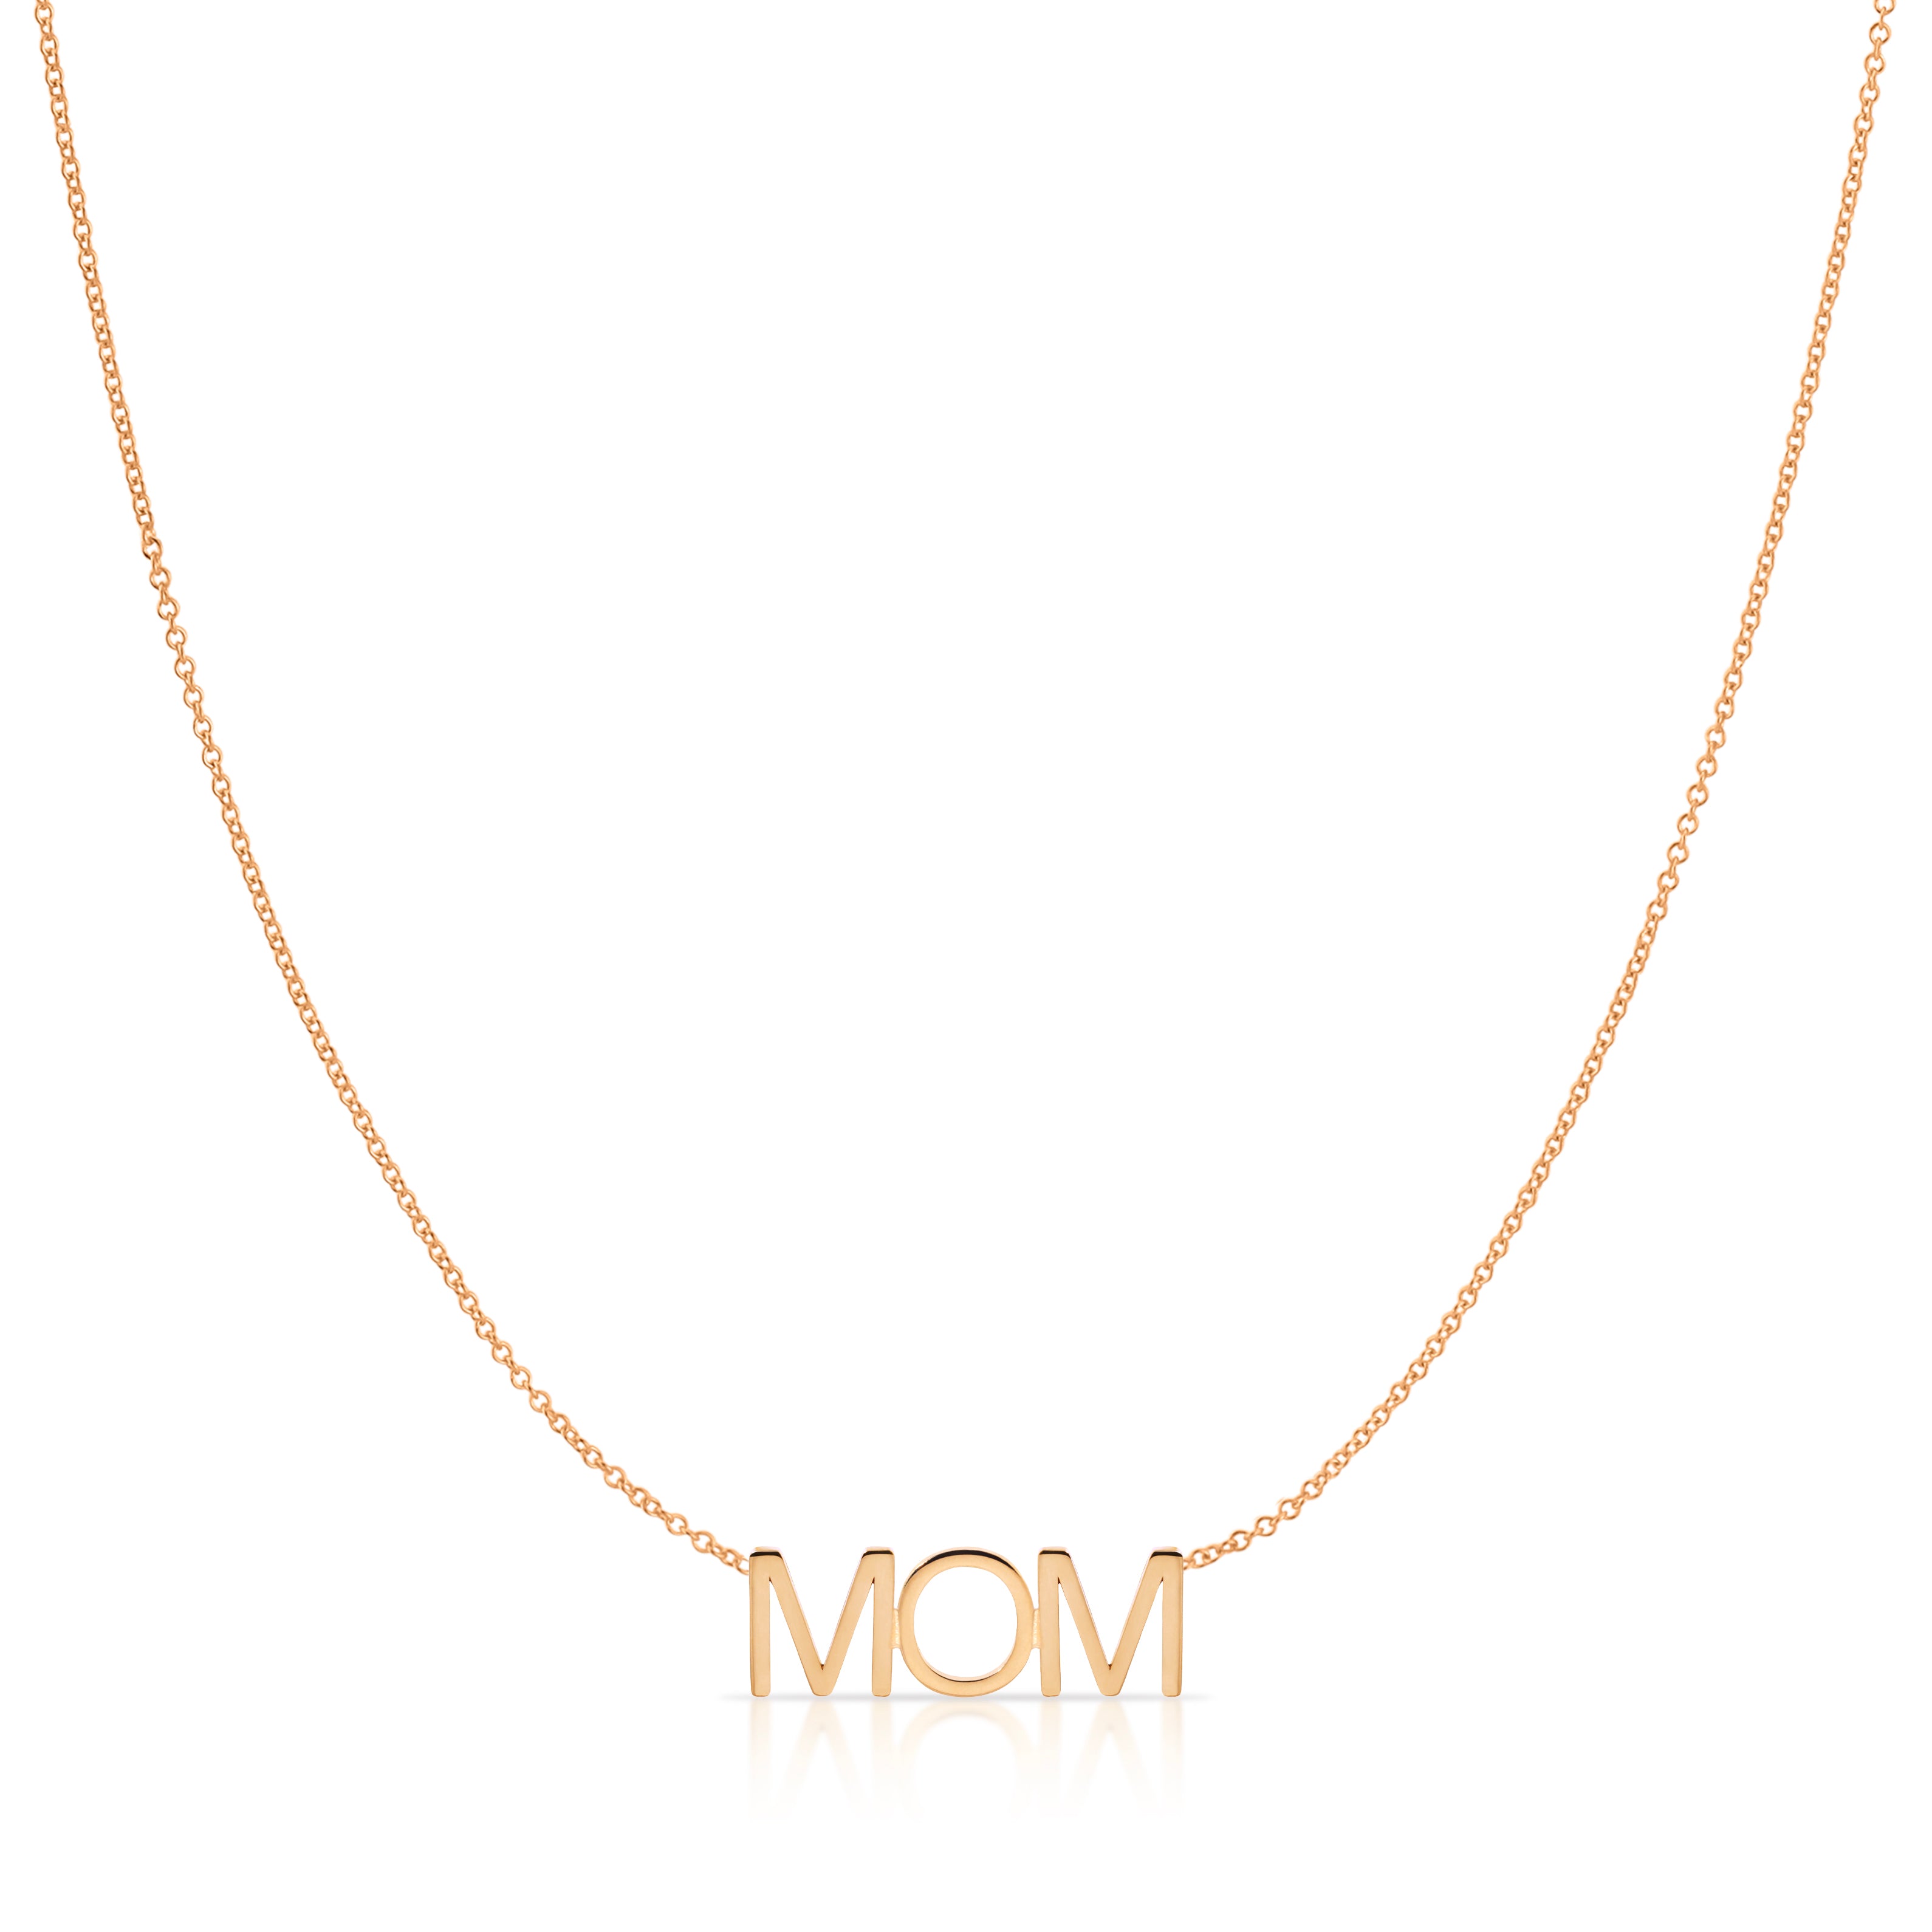 MOM Necklace